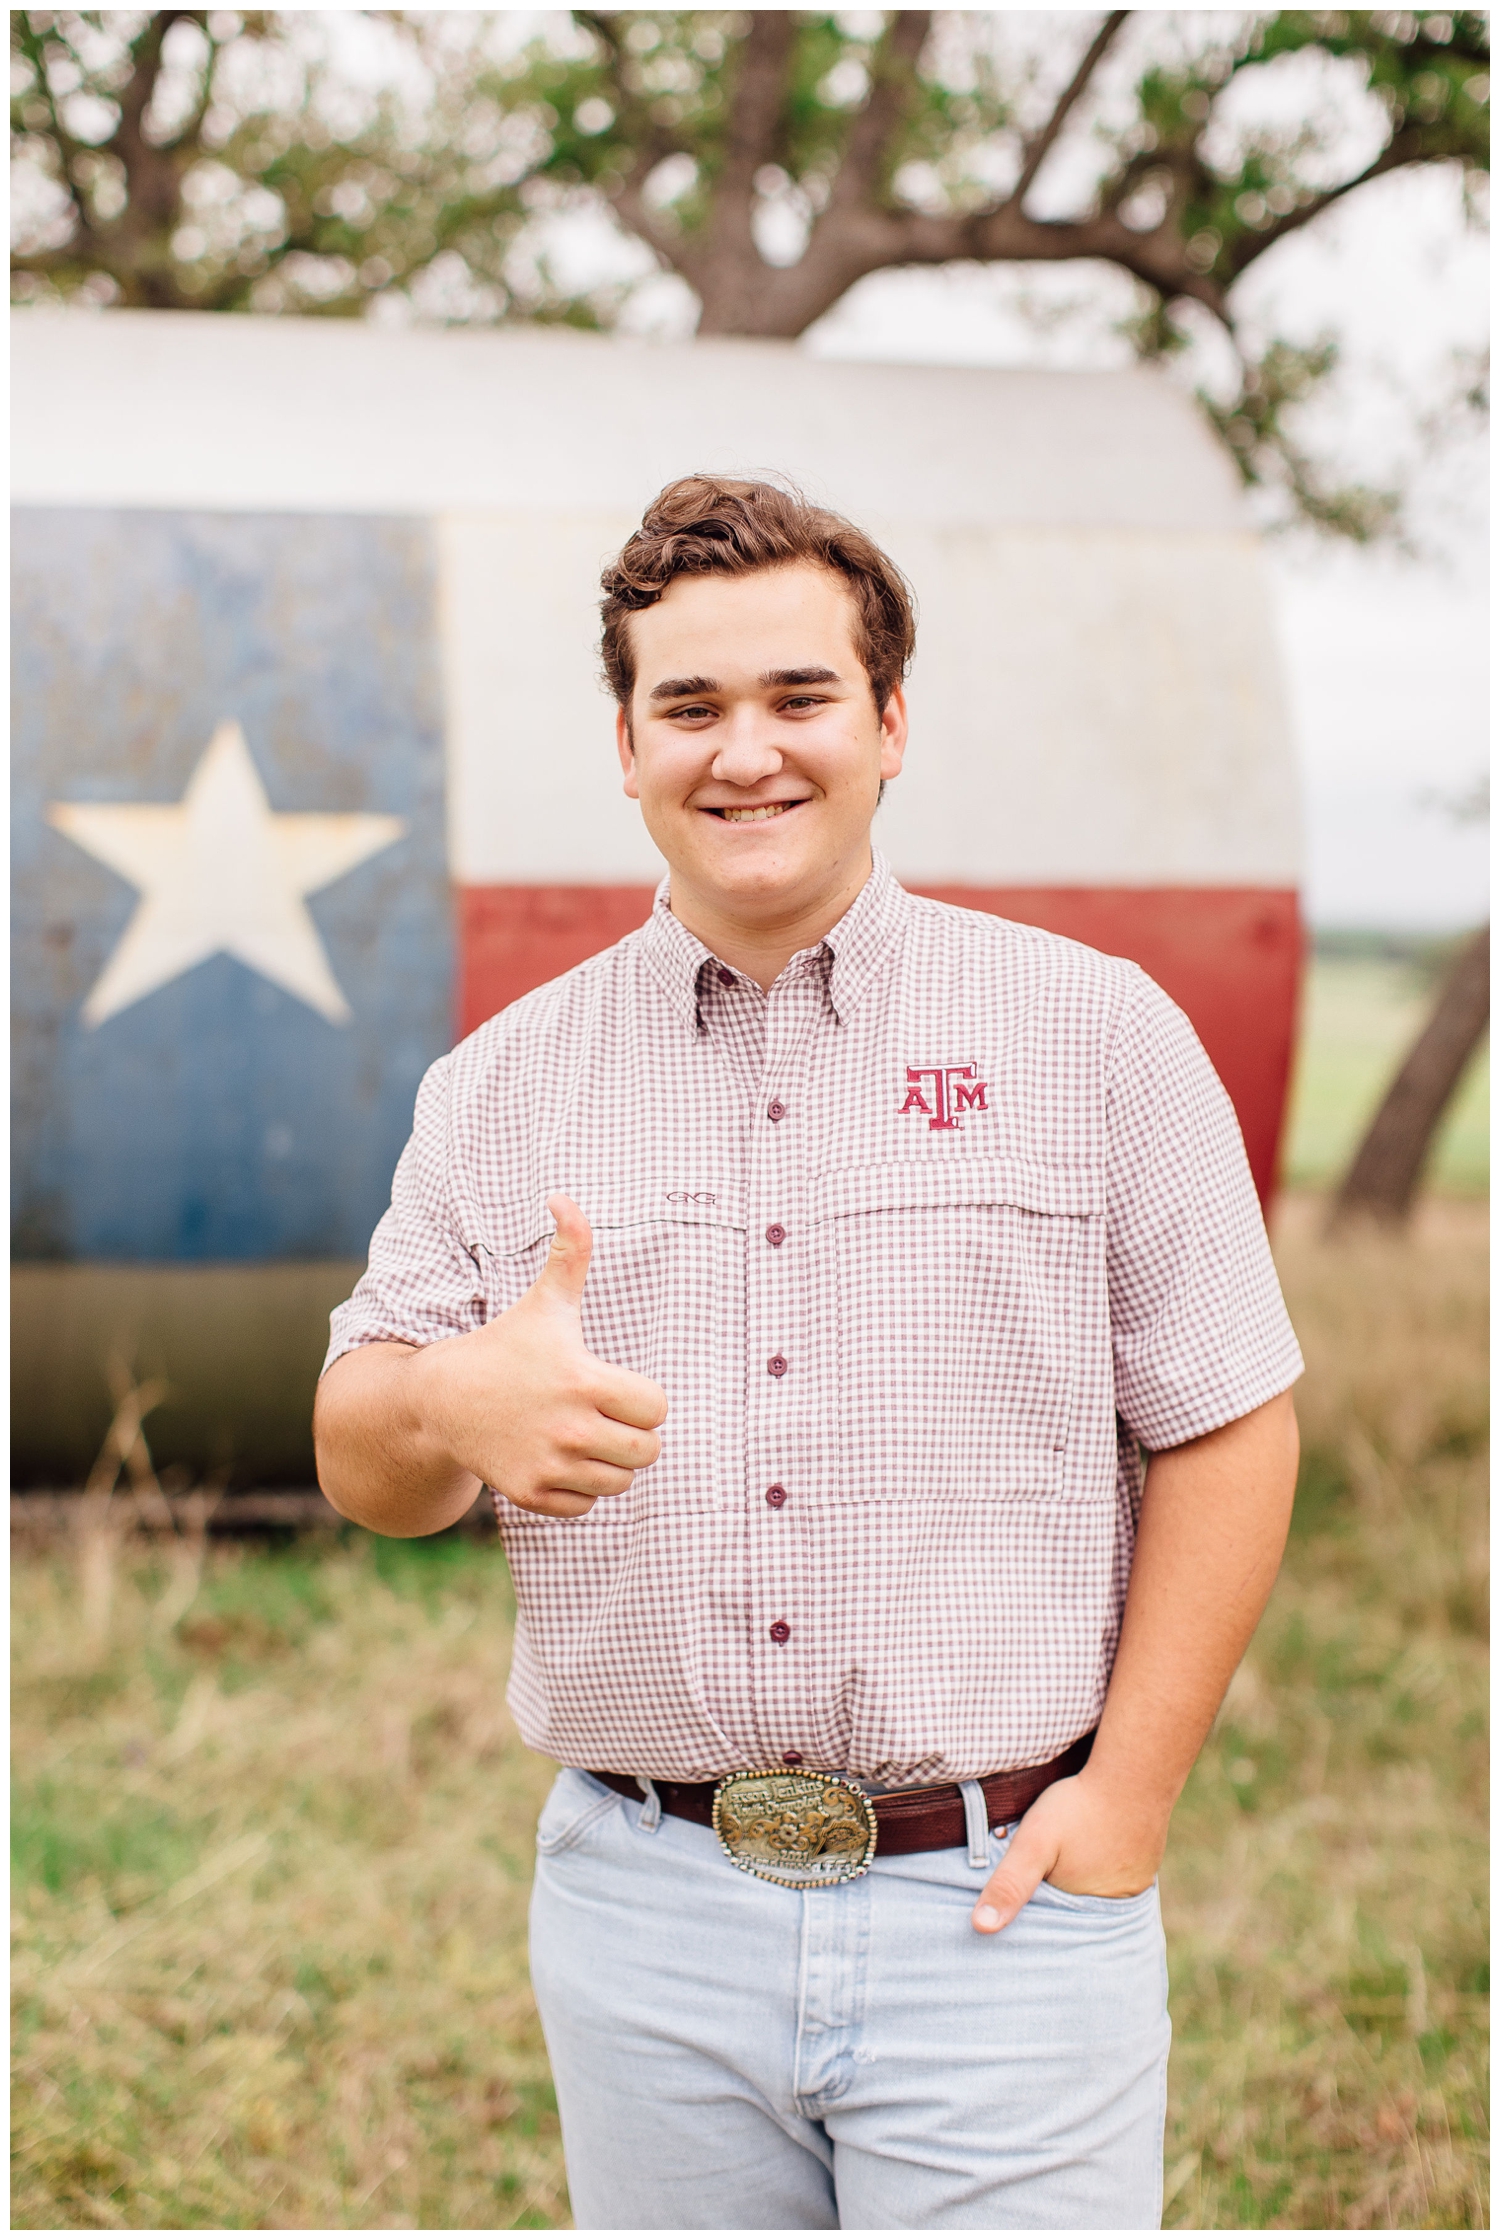 high school senior guy smiling at camera in plaid shirt and jeans with Gig Em hand sign